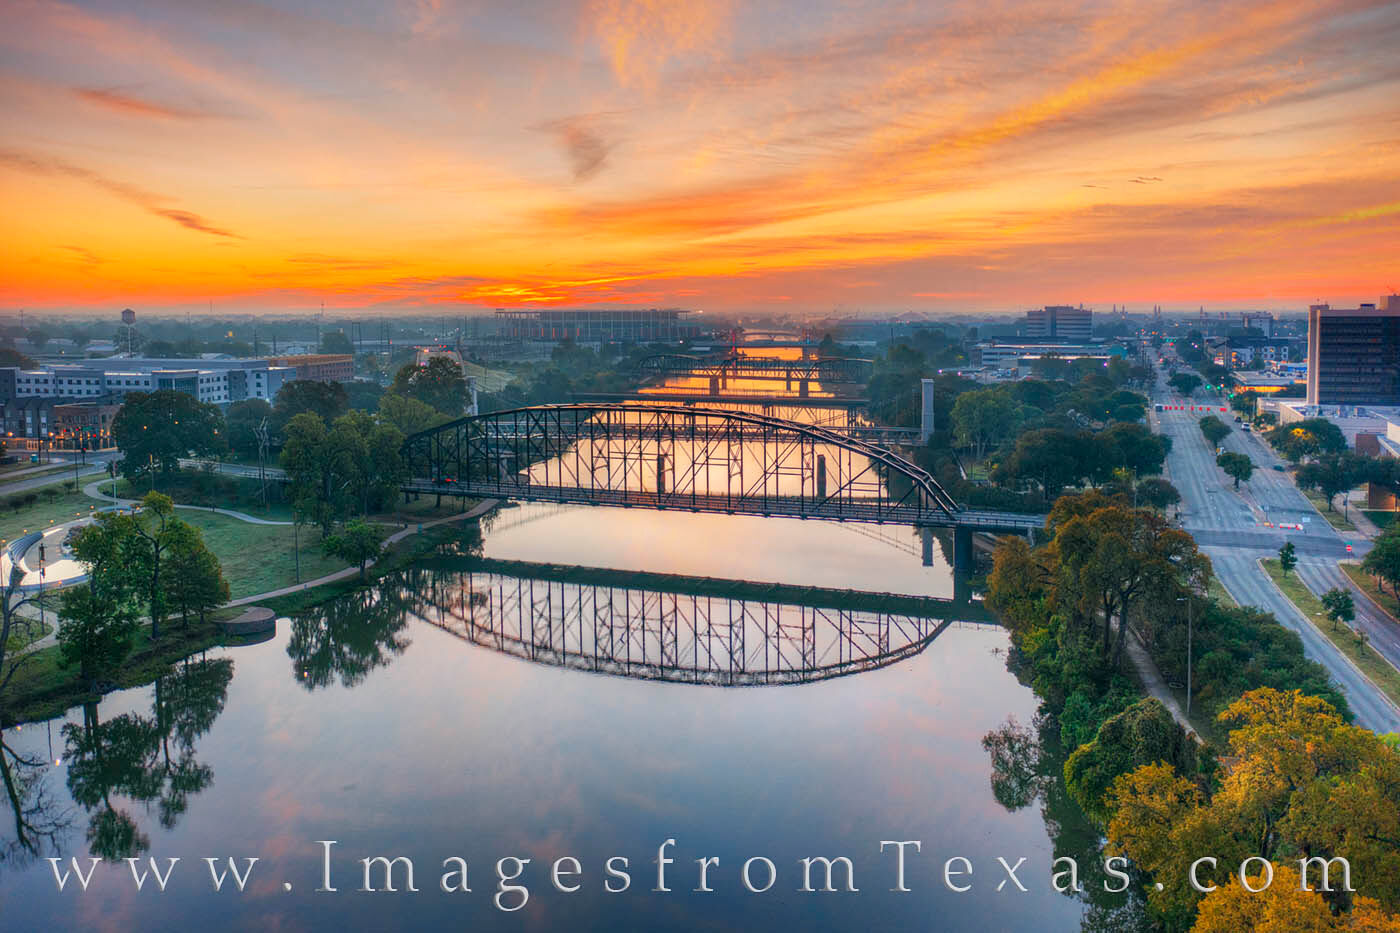 A beautiful sky brings a vibrant start to the day in Waco, Texas. Far below is the calm Brazos River spanned by several bridges...